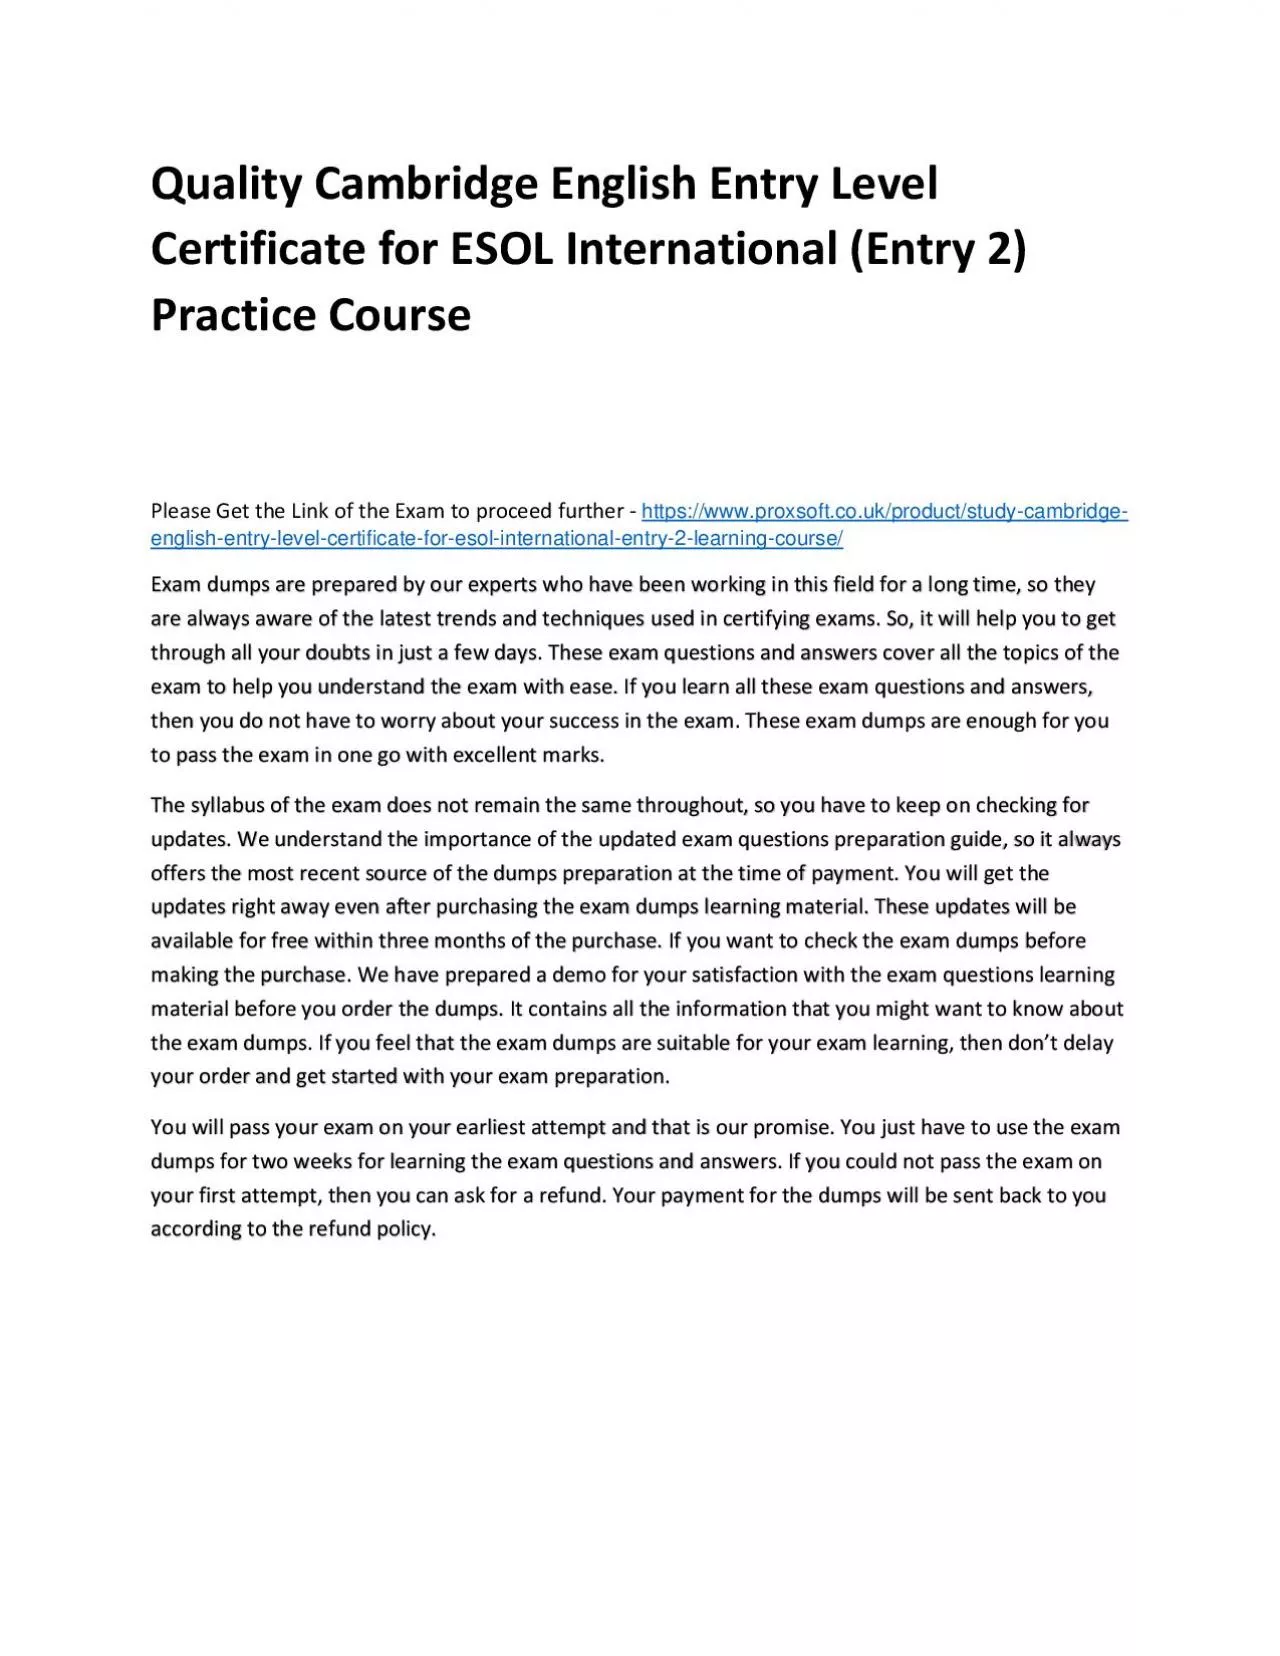 Quality Cambridge English Entry Level Certificate for ESOL International (Entry 2) Practice